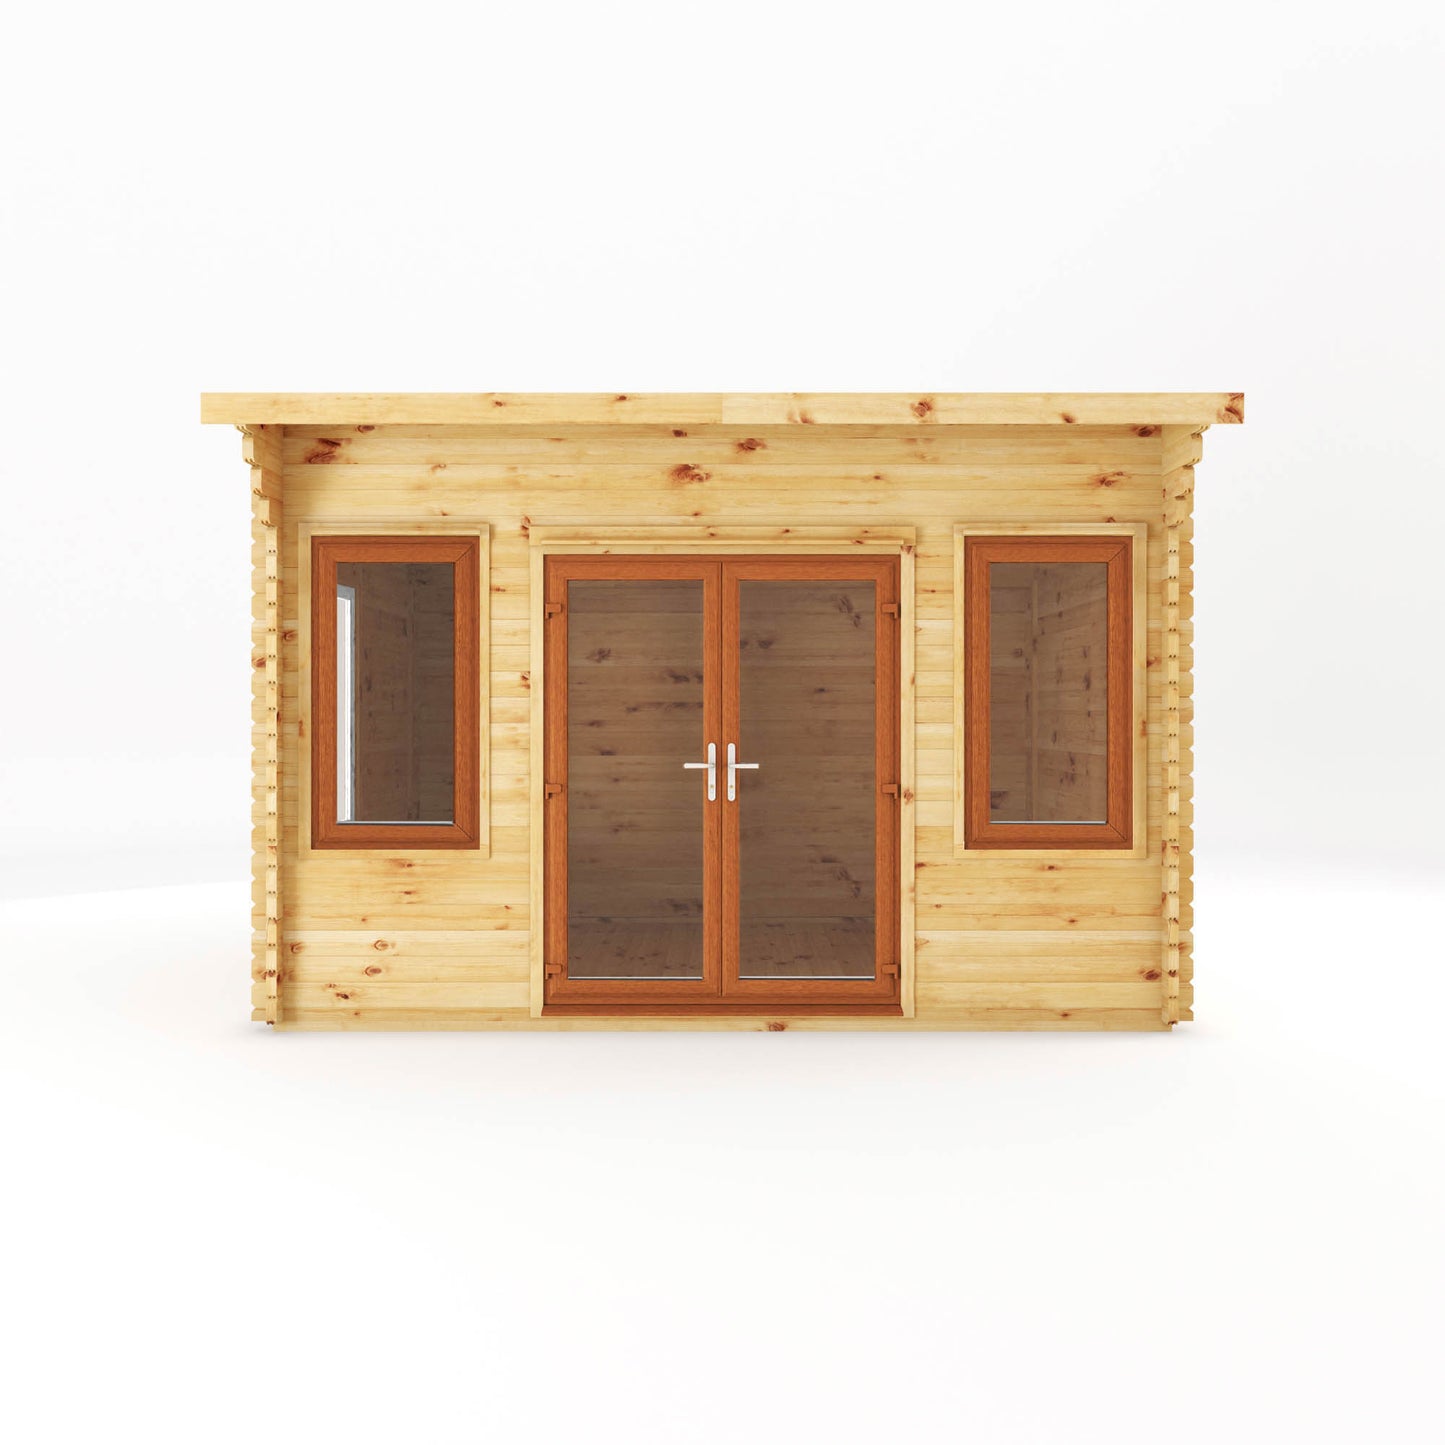 The 4m x 3m Tawny Curved Roof Log Cabin with Oak UPVC